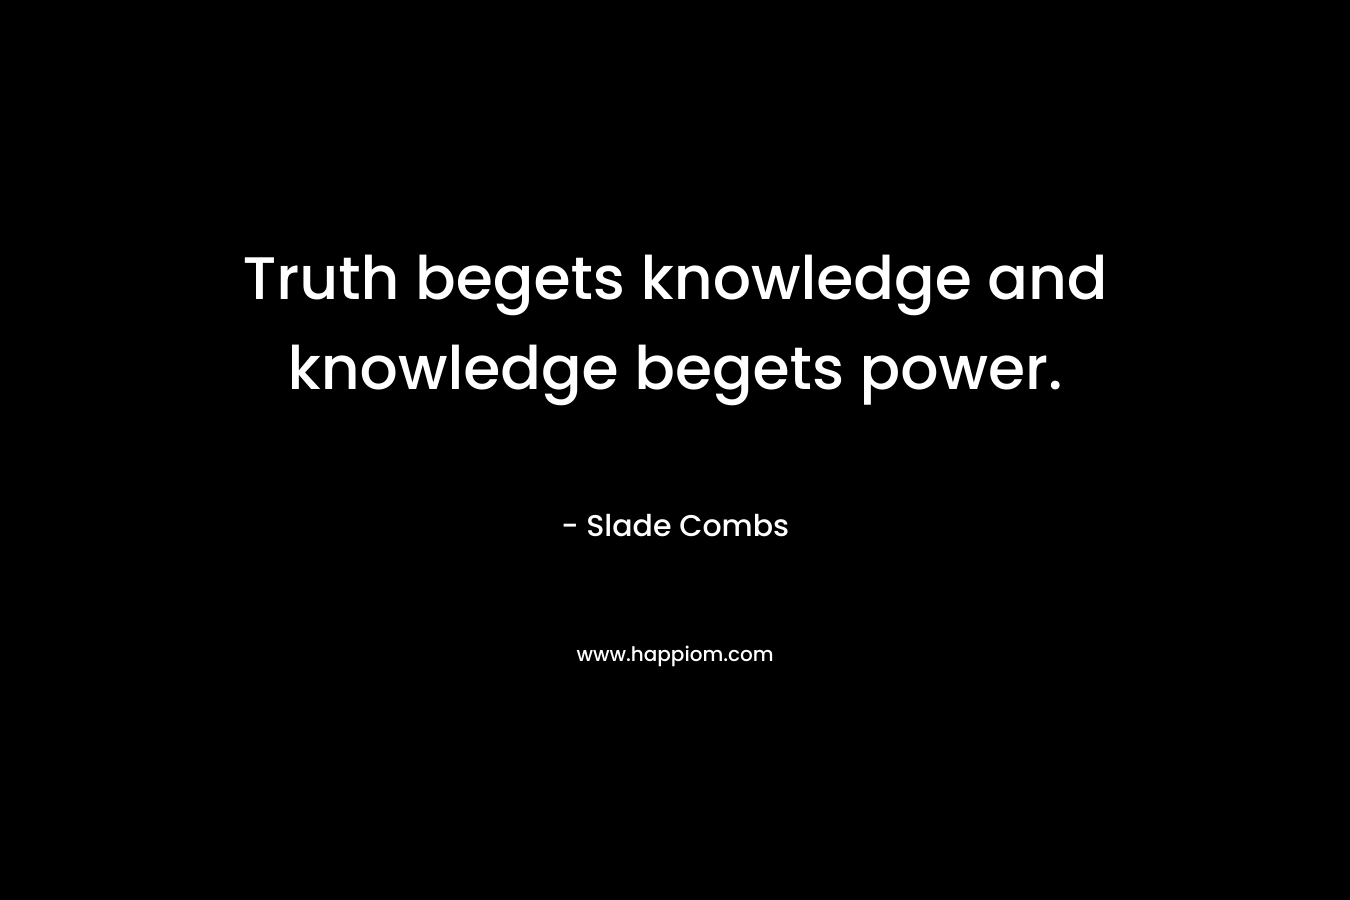 Truth begets knowledge and knowledge begets power.